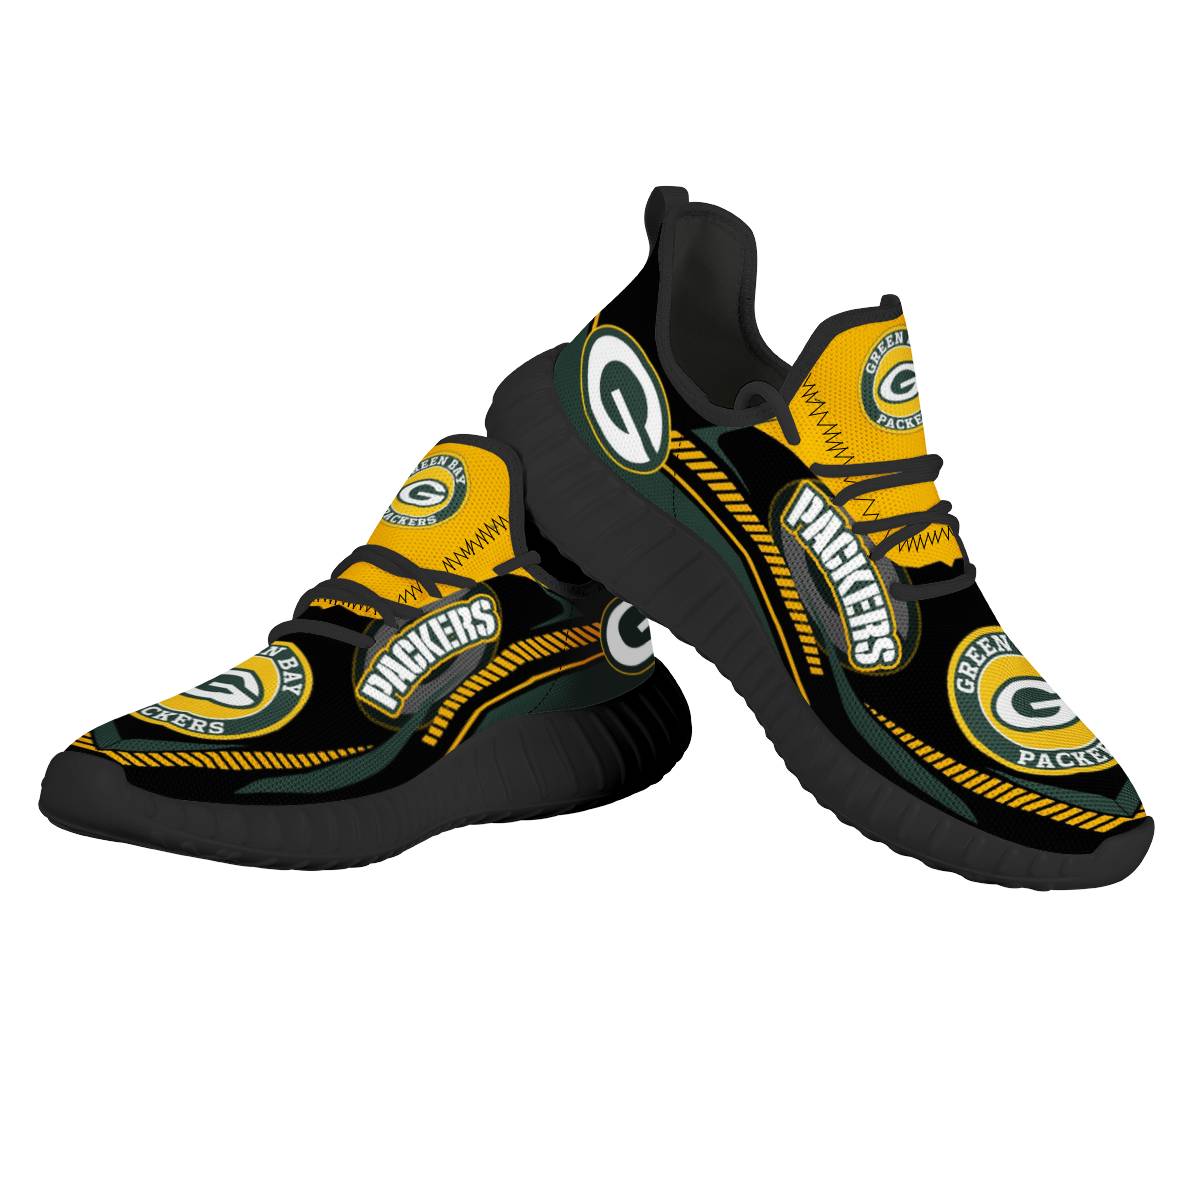 Men's Green Bay Packers Mesh Knit Sneakers/Shoes 014